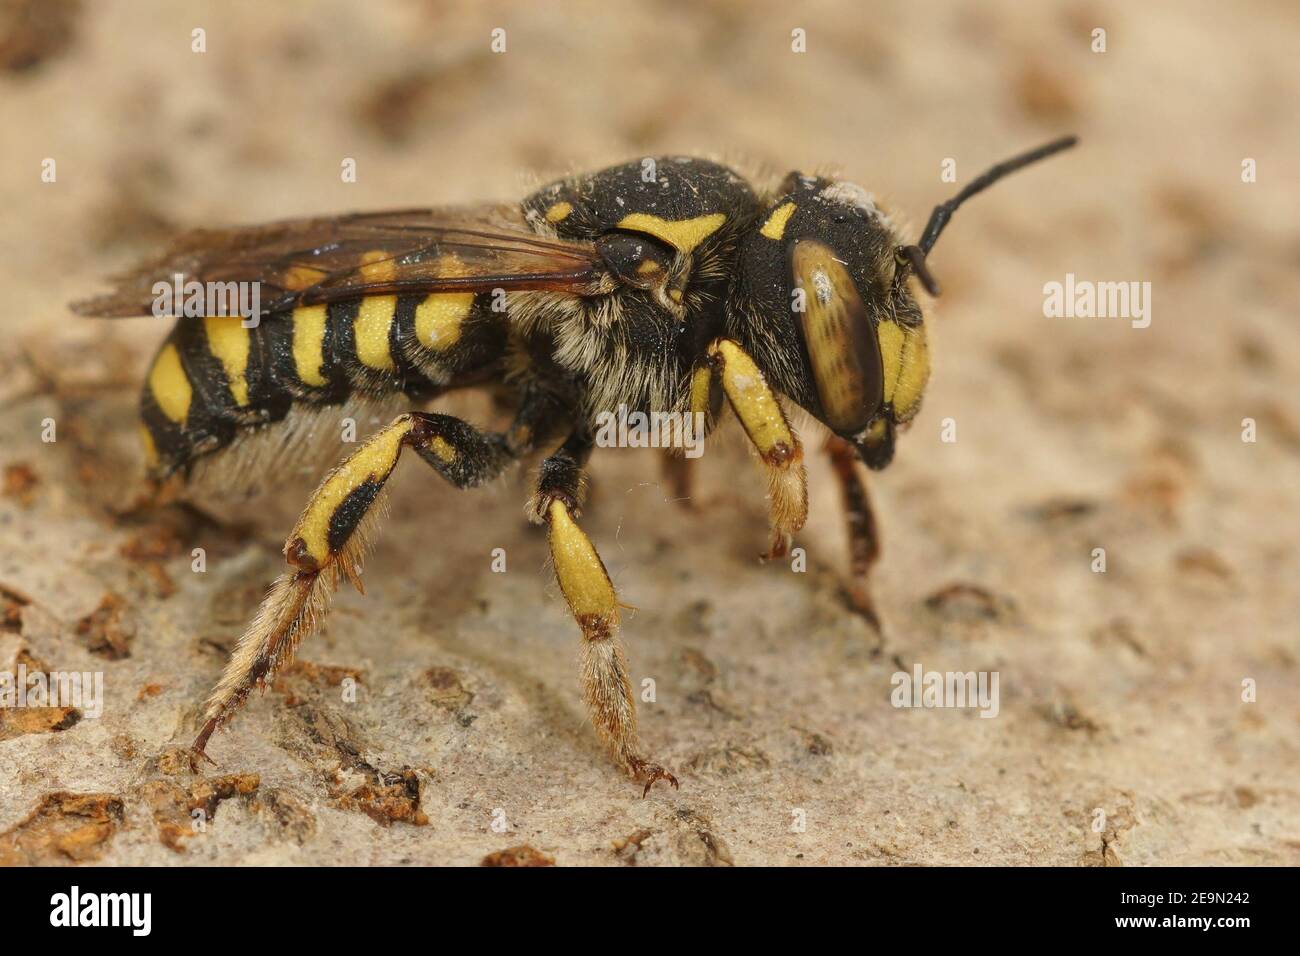 Close up of one of the larger carder bees in France, Anthidium florentinum Stock Photo